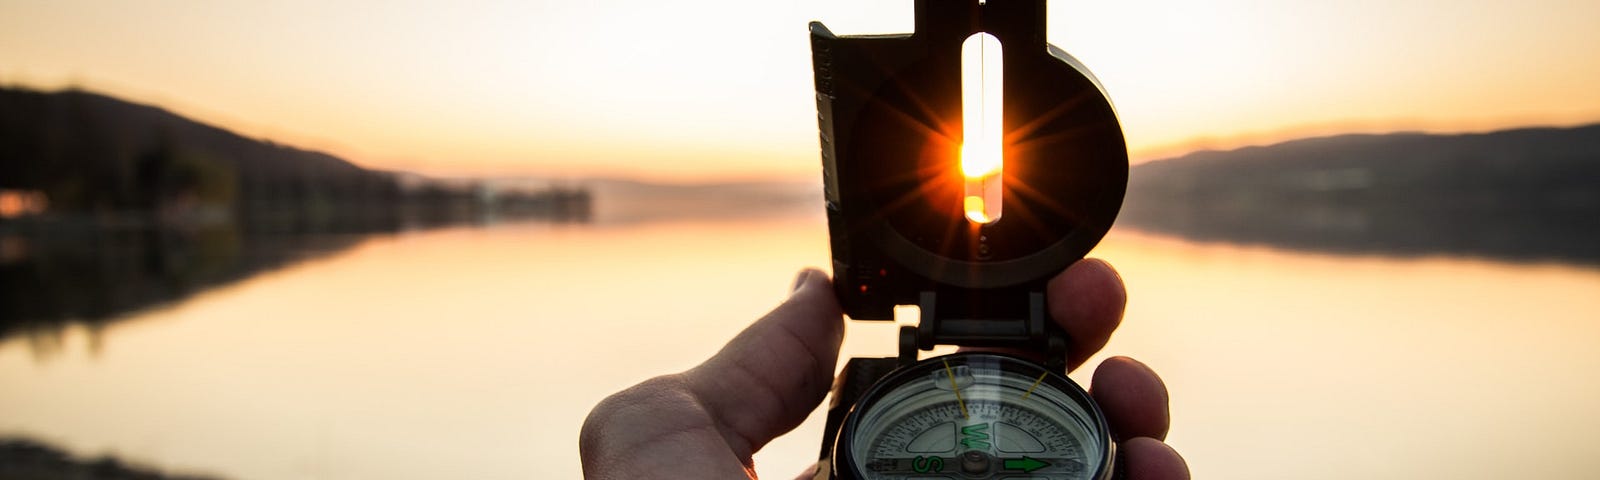 Colour photograph of a person holding a compass up to the horizon overlooking a lake at dawn.